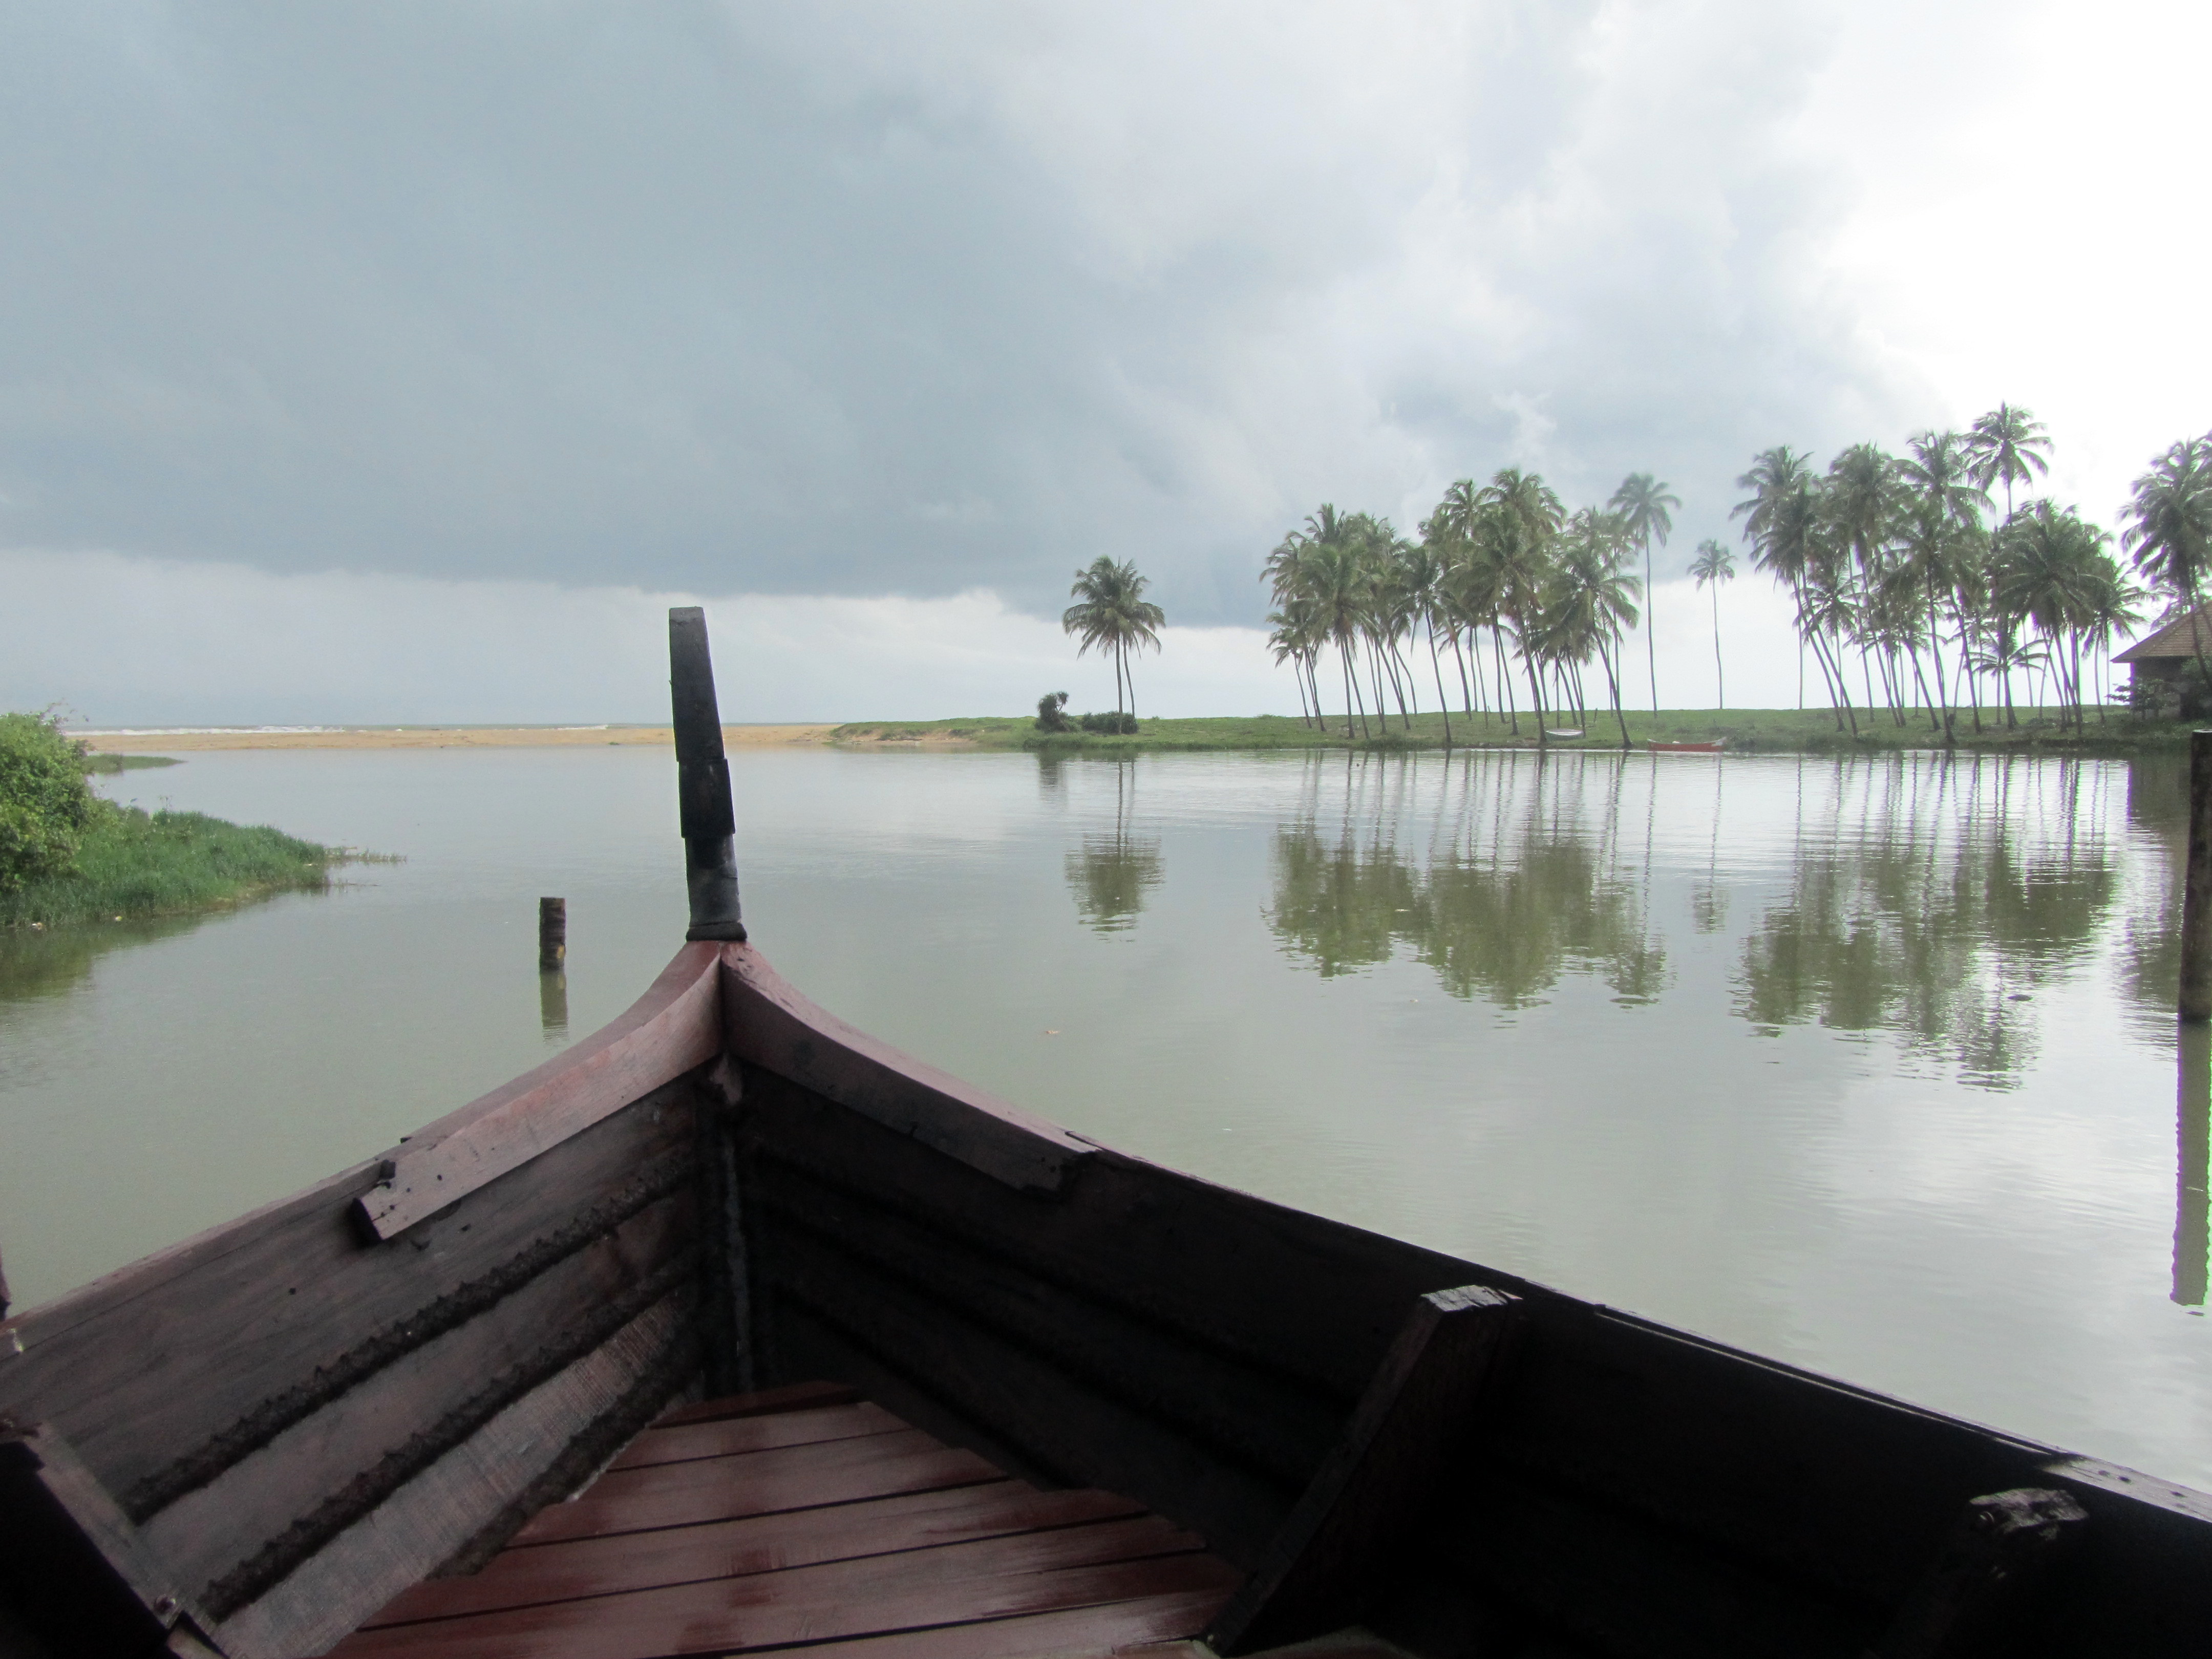 A boat ride to experience the backwaters